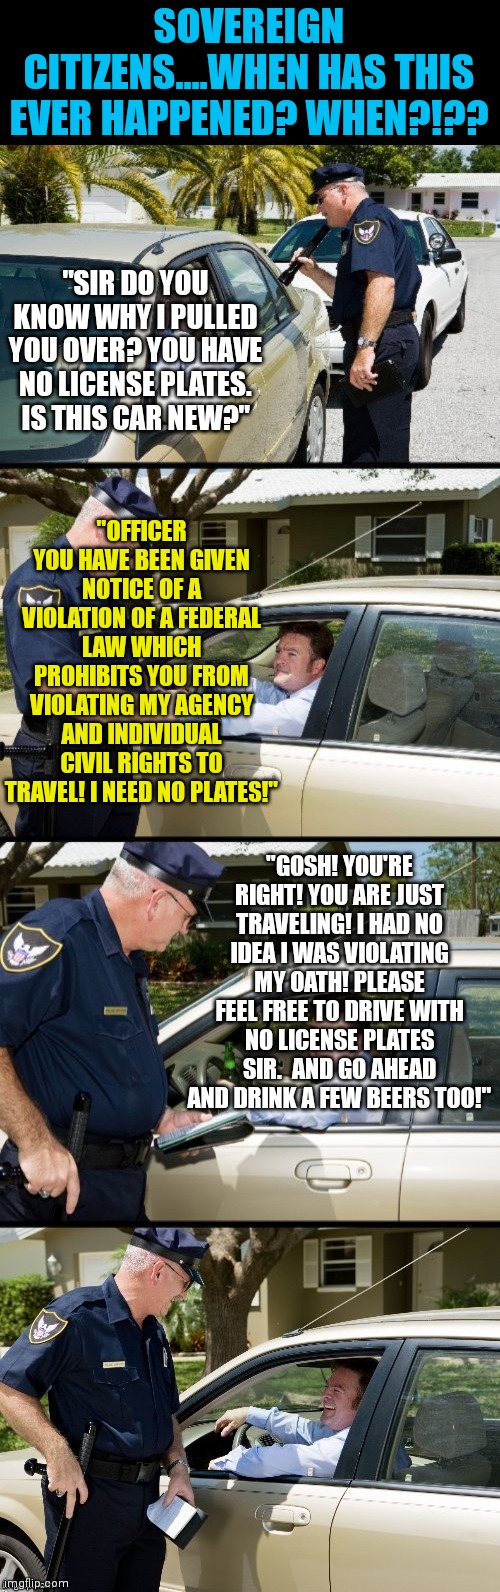 Pulled over |  SOVEREIGN CITIZENS....WHEN HAS THIS EVER HAPPENED? WHEN?!?? "SIR DO YOU KNOW WHY I PULLED YOU OVER? YOU HAVE NO LICENSE PLATES. IS THIS CAR NEW?"; "OFFICER YOU HAVE BEEN GIVEN NOTICE OF A VIOLATION OF A FEDERAL LAW WHICH PROHIBITS YOU FROM VIOLATING MY AGENCY AND INDIVIDUAL CIVIL RIGHTS TO TRAVEL! I NEED NO PLATES!"; "GOSH! YOU'RE RIGHT! YOU ARE JUST TRAVELING! I HAD NO IDEA I WAS VIOLATING MY OATH! PLEASE FEEL FREE TO DRIVE WITH NO LICENSE PLATES SIR.  AND GO AHEAD AND DRINK A FEW BEERS TOO!" | image tagged in pulled over | made w/ Imgflip meme maker